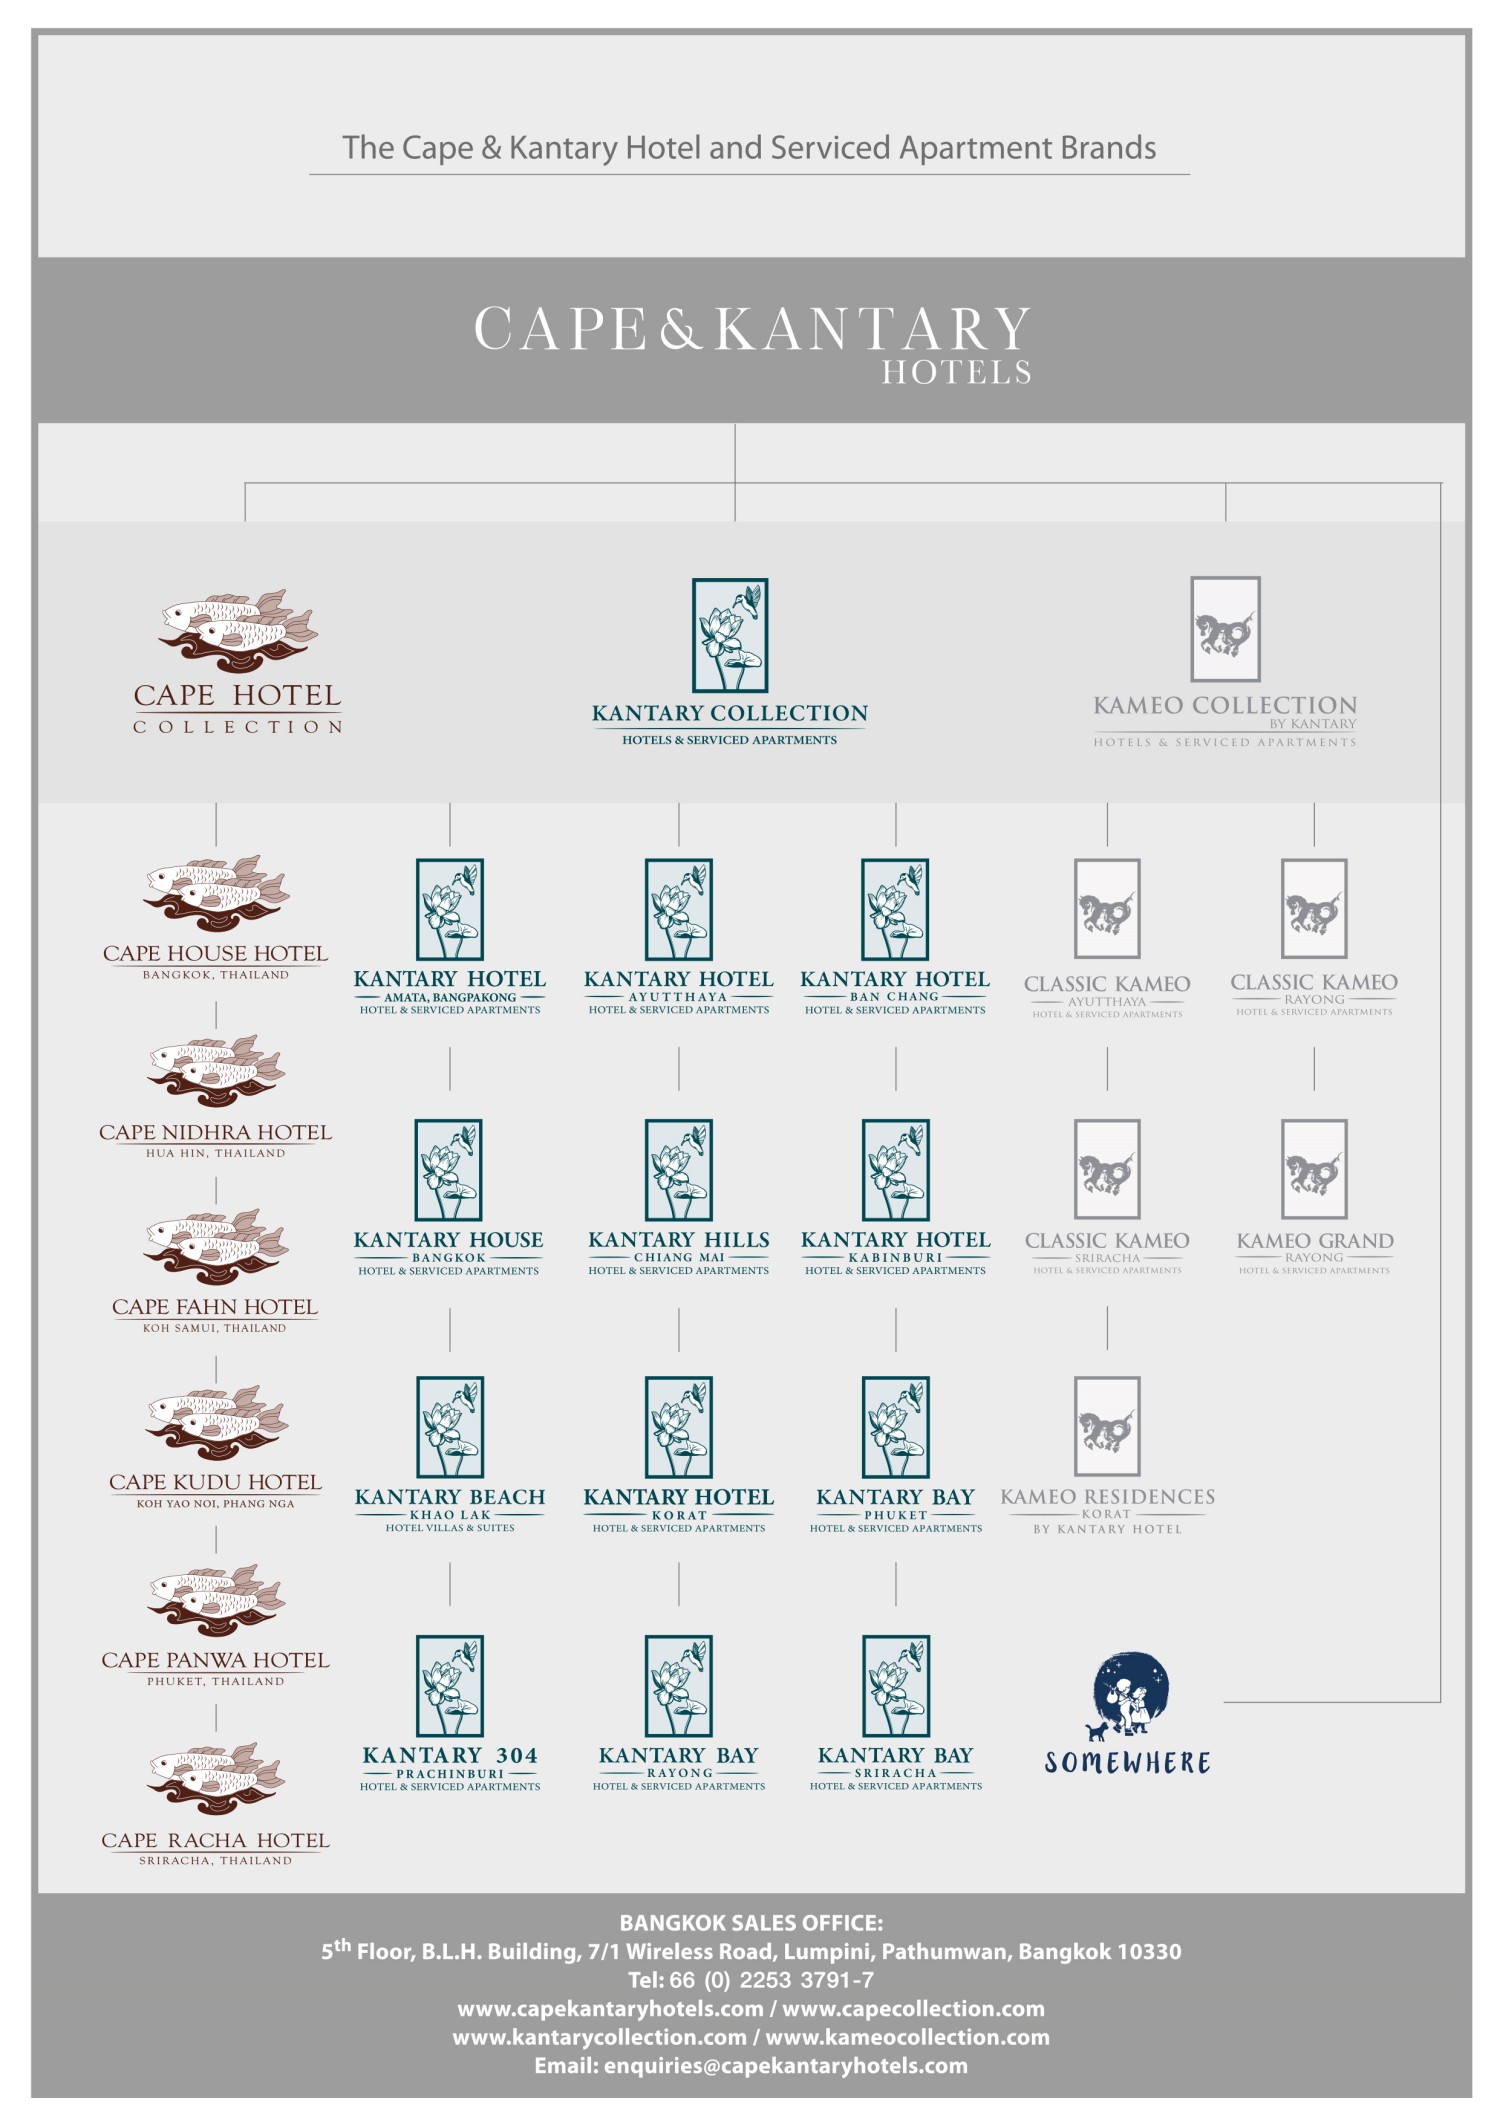 The Cape & Kantary Hotel and Serviced Apartment Brands